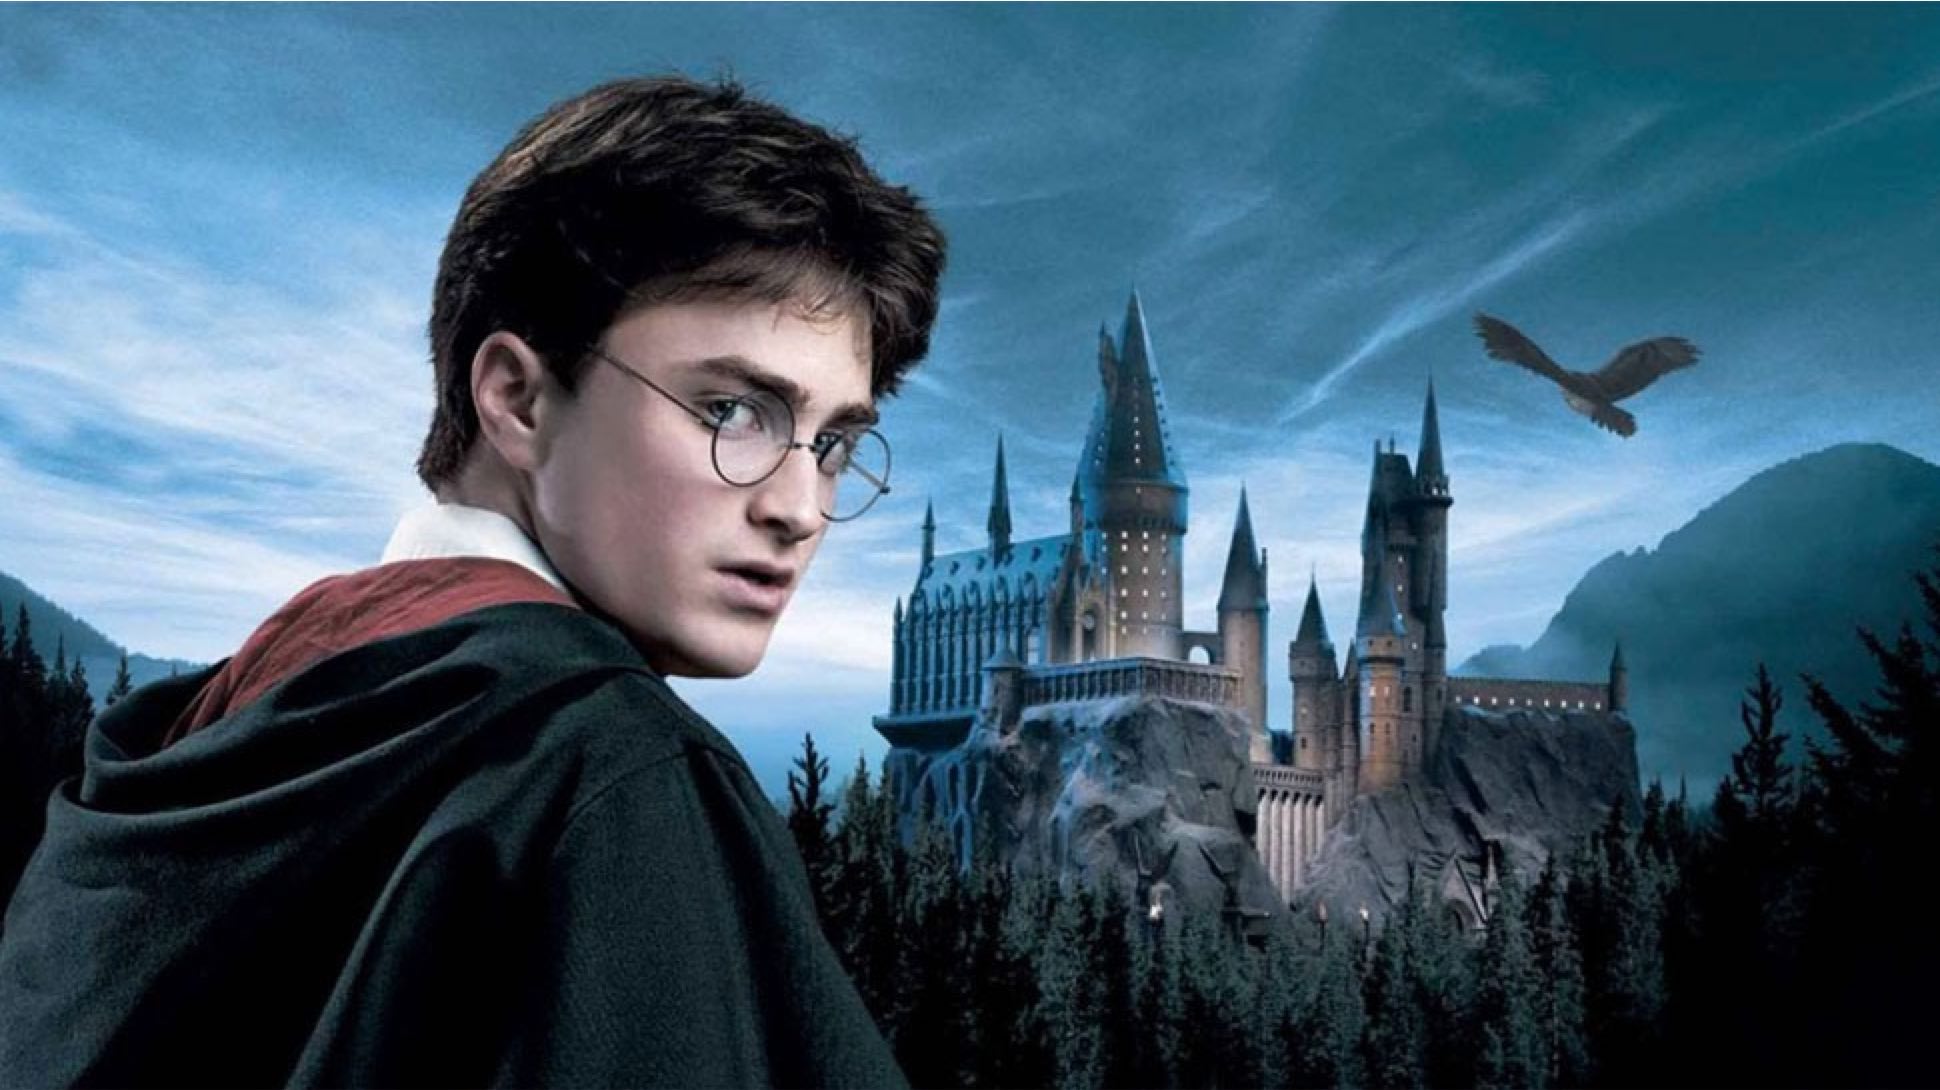 Four New Posters for 'Harry Potter and the Deathly Hallows: Part 2